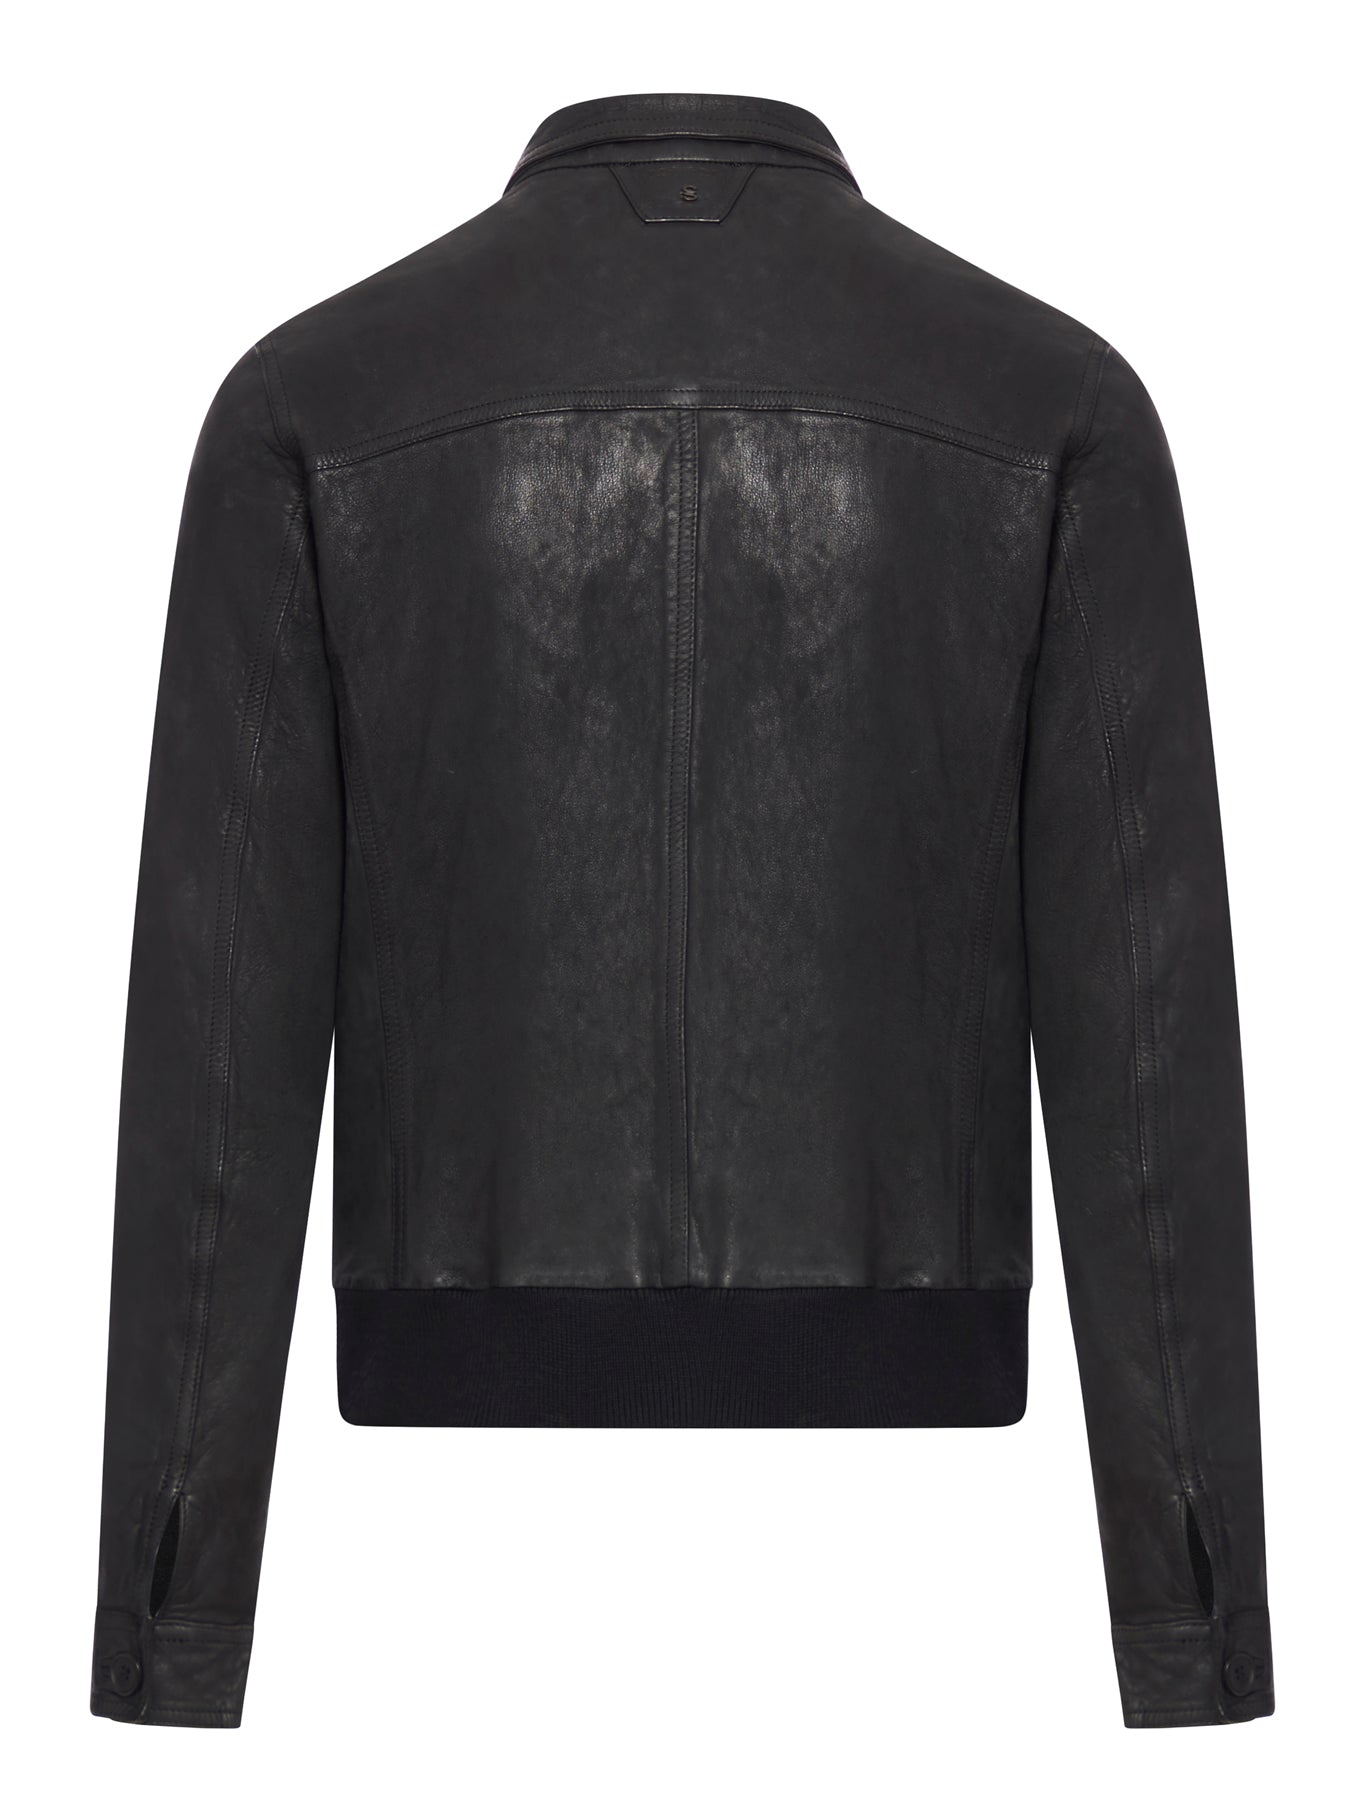 BOMBER JACKET IN LEATHER